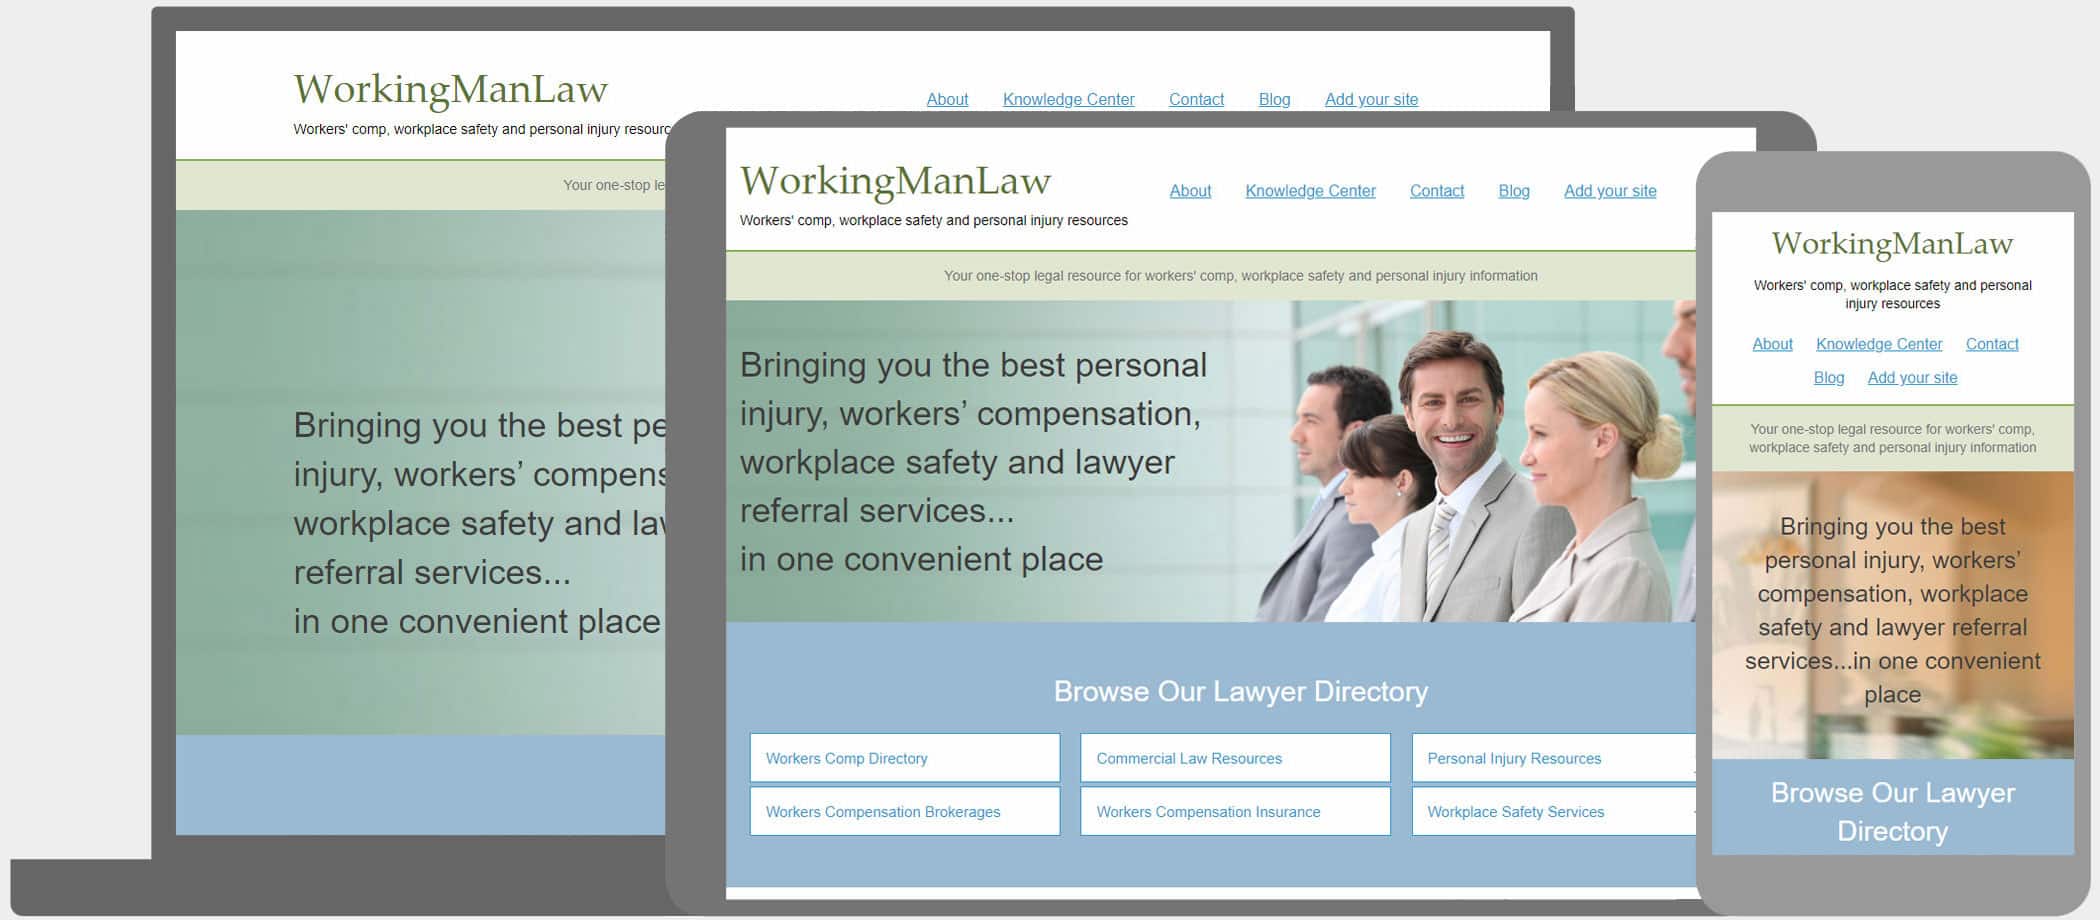 WorkingManLaw.com: Responsive web design and search engine marketing for an exclusive online legal directory for workers' compensation attorneys.